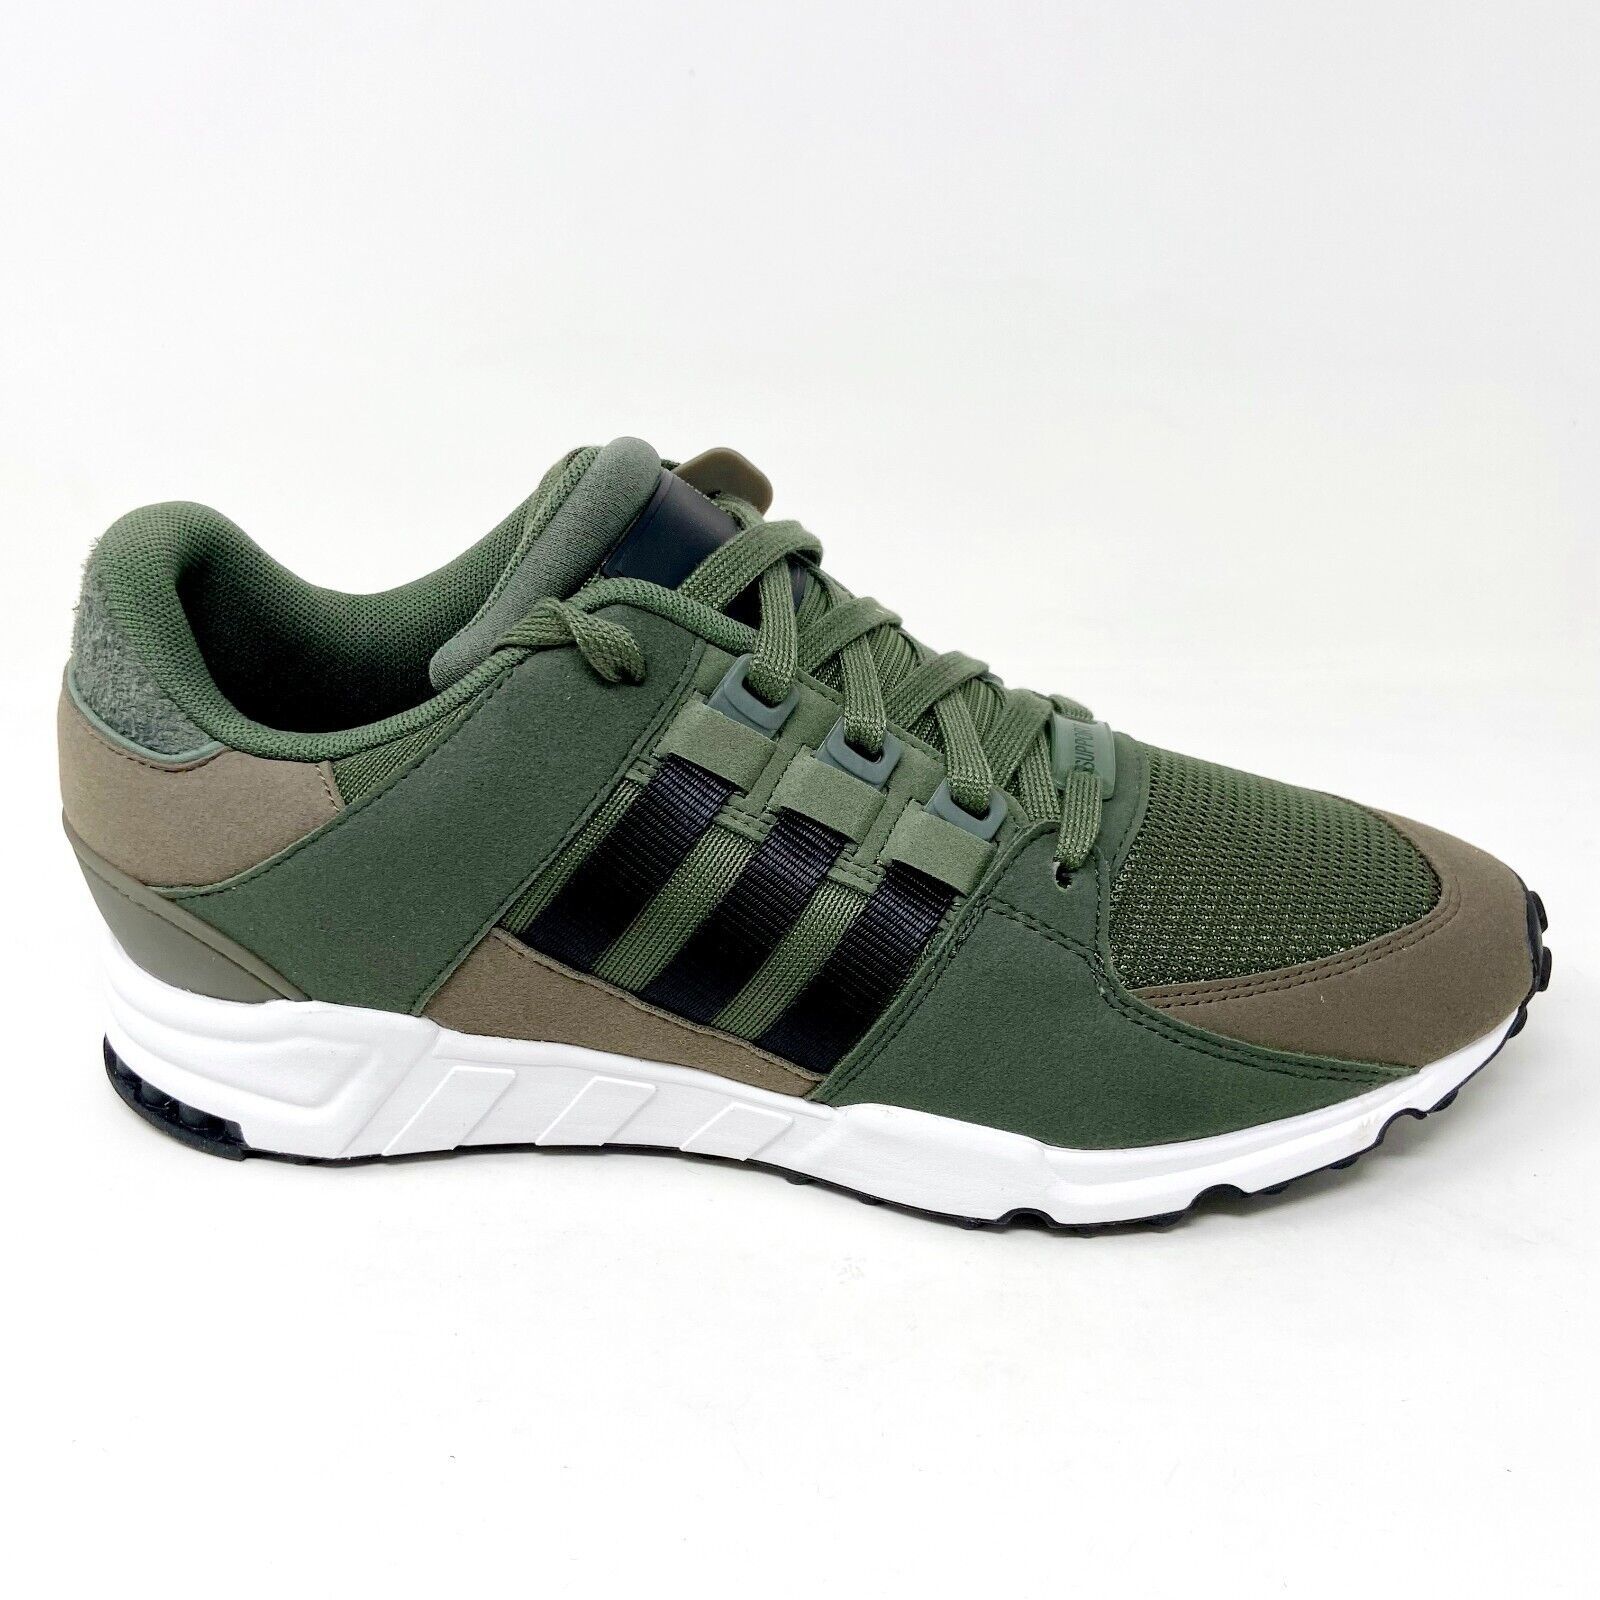 Adidas Originals EQT Support 93 RF  Olive Green Mens Trainer Sneakers BY9628